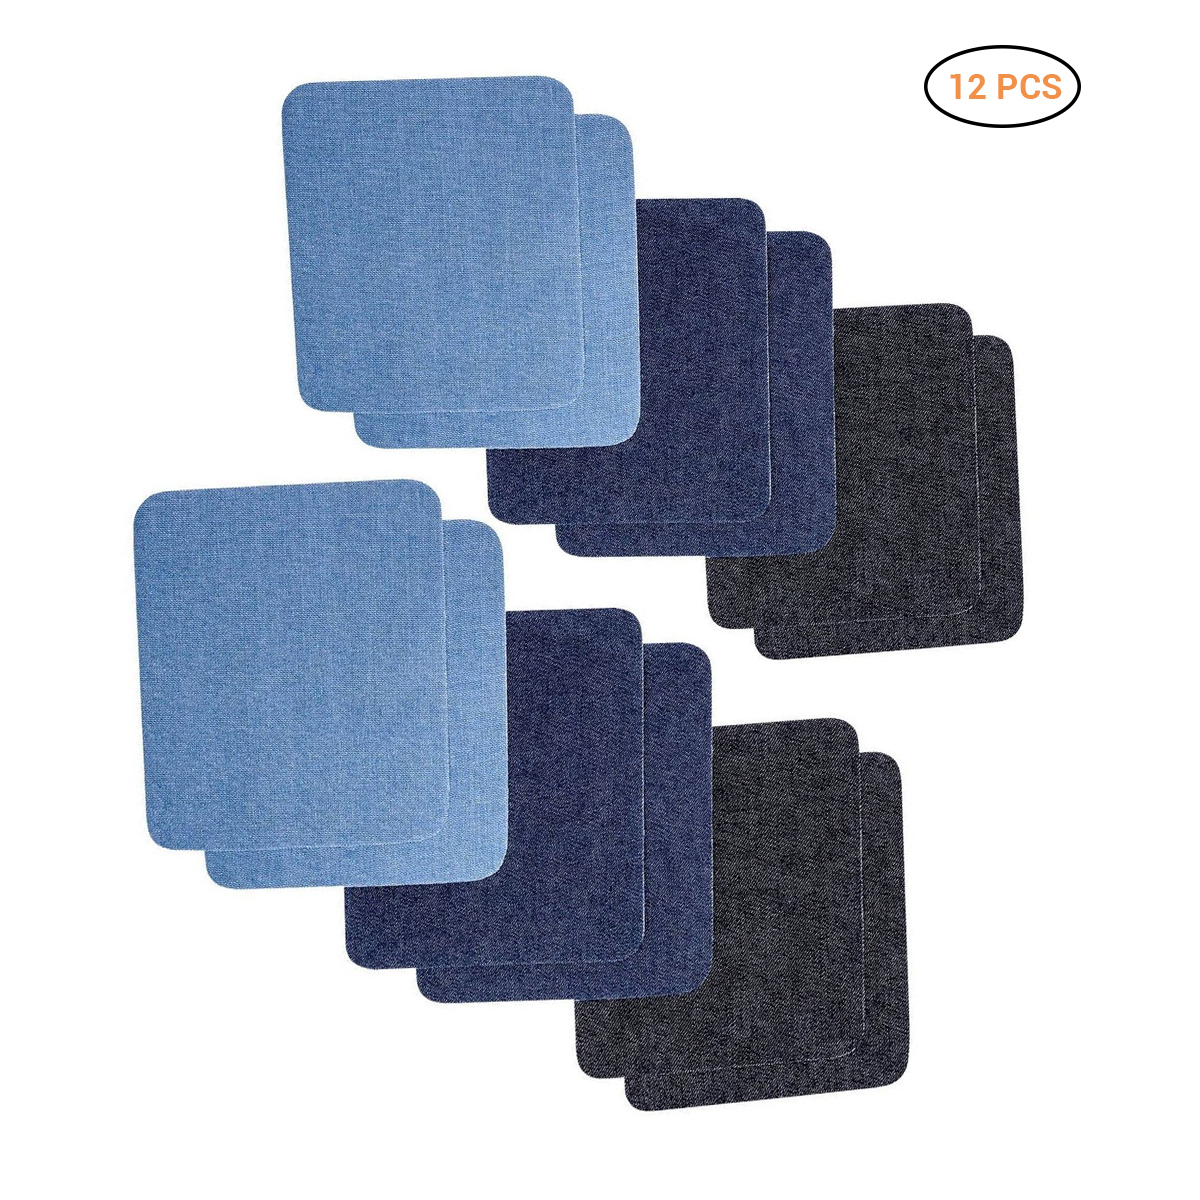 12 PCS Denim Patches DIY Iron On Denim Elbow Patches Repair Pants For Jean Clothing And Jean Pants Apparel Sewing Fabric